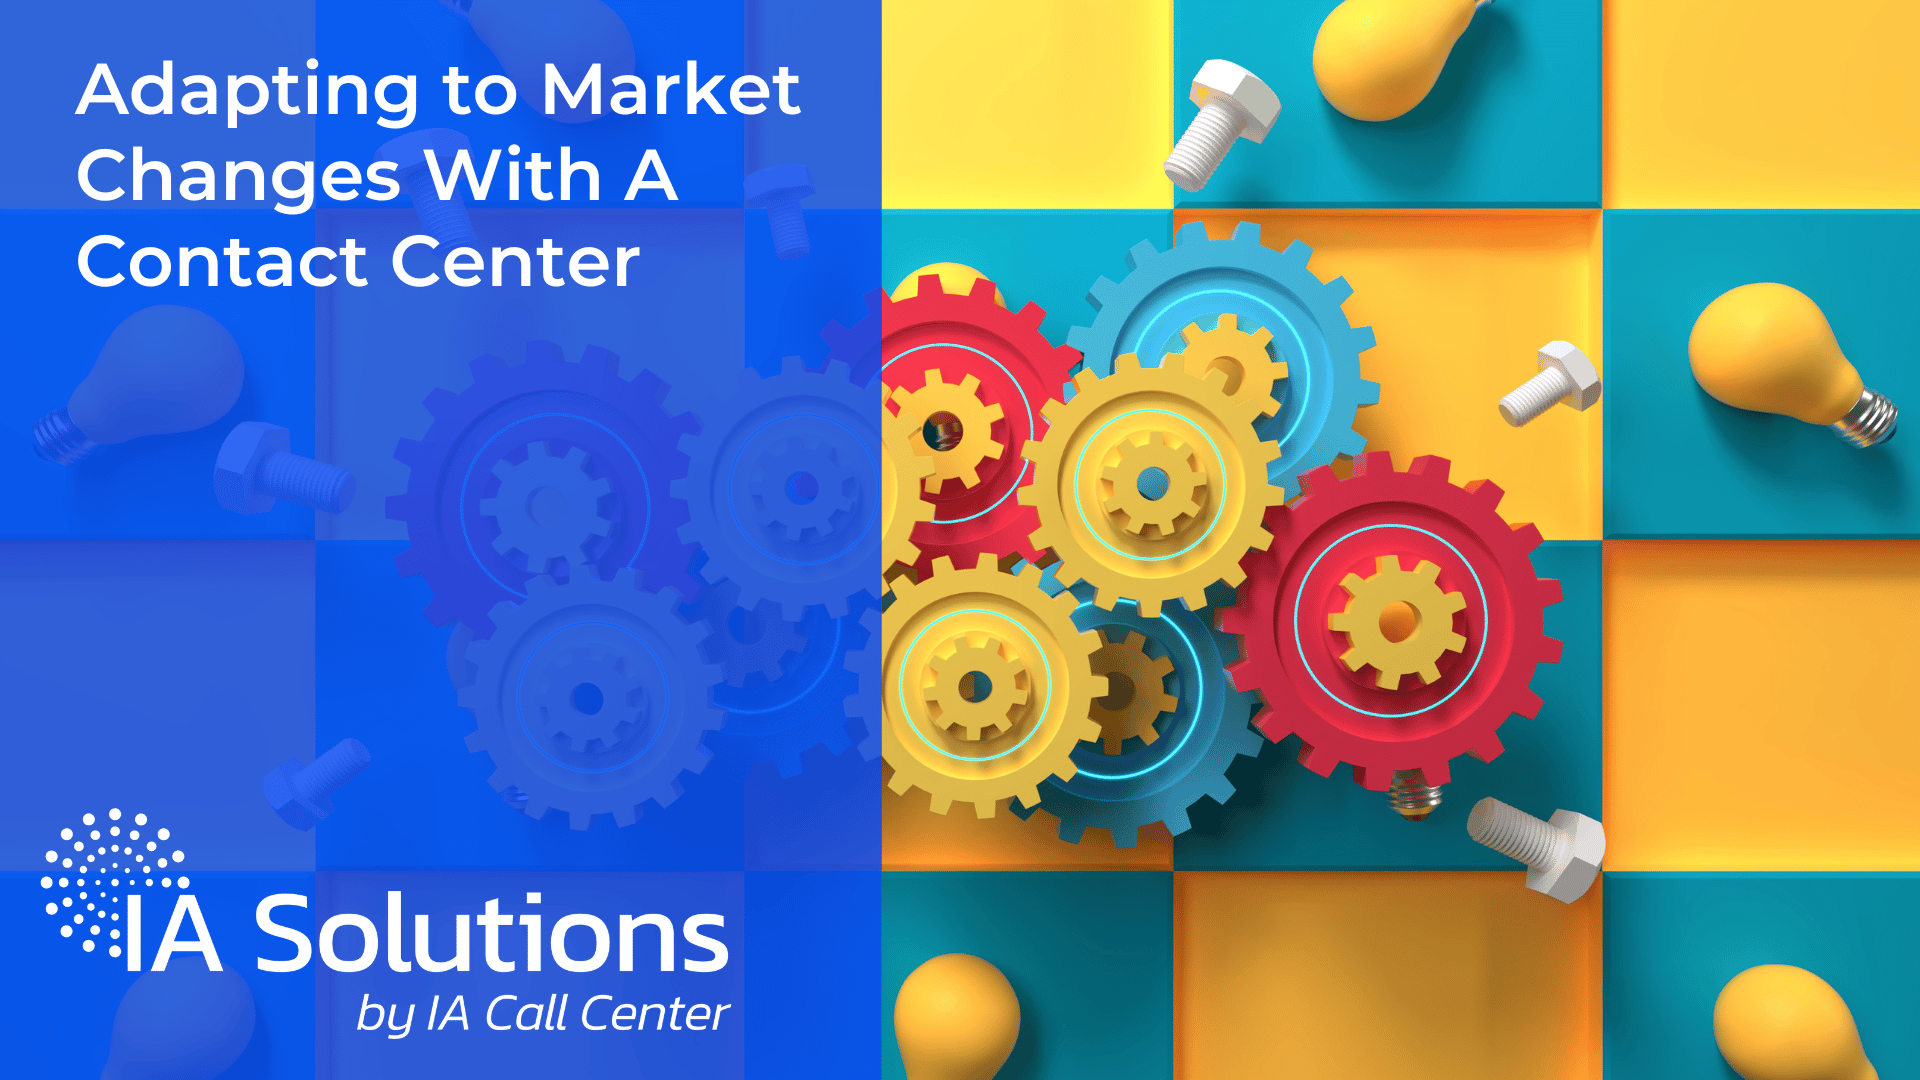 Adapting to Market Changes With A Contact Center